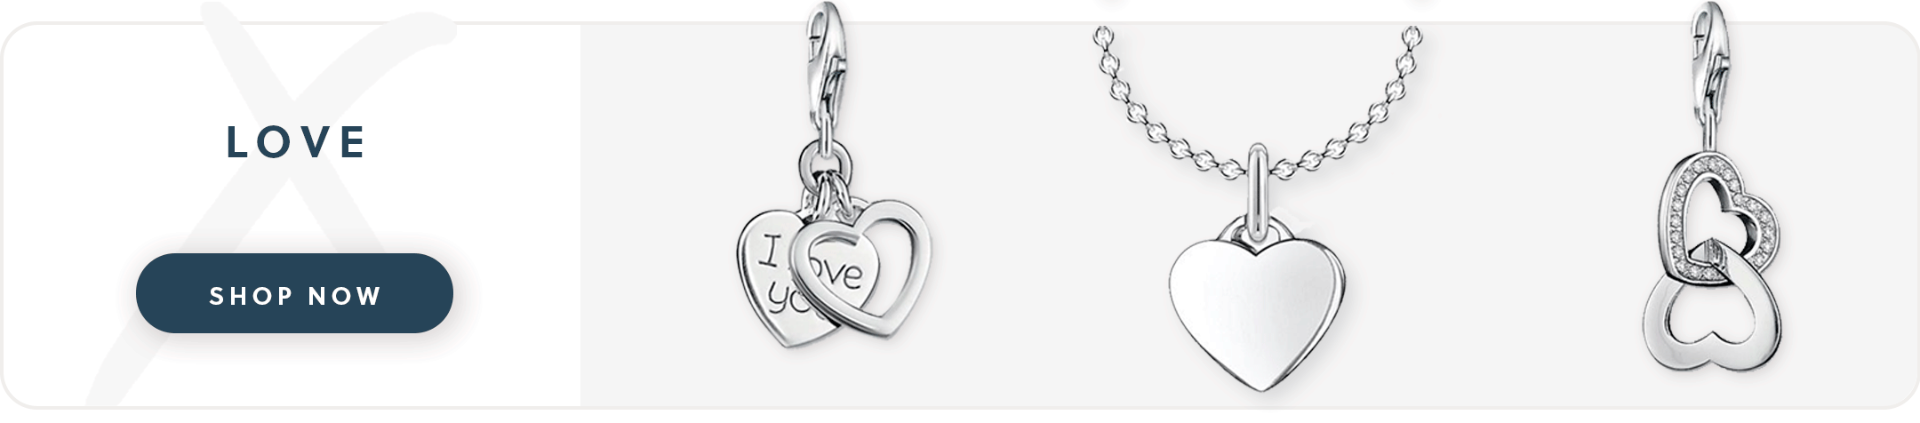 Three thomas sabo heart charms with text love shop now